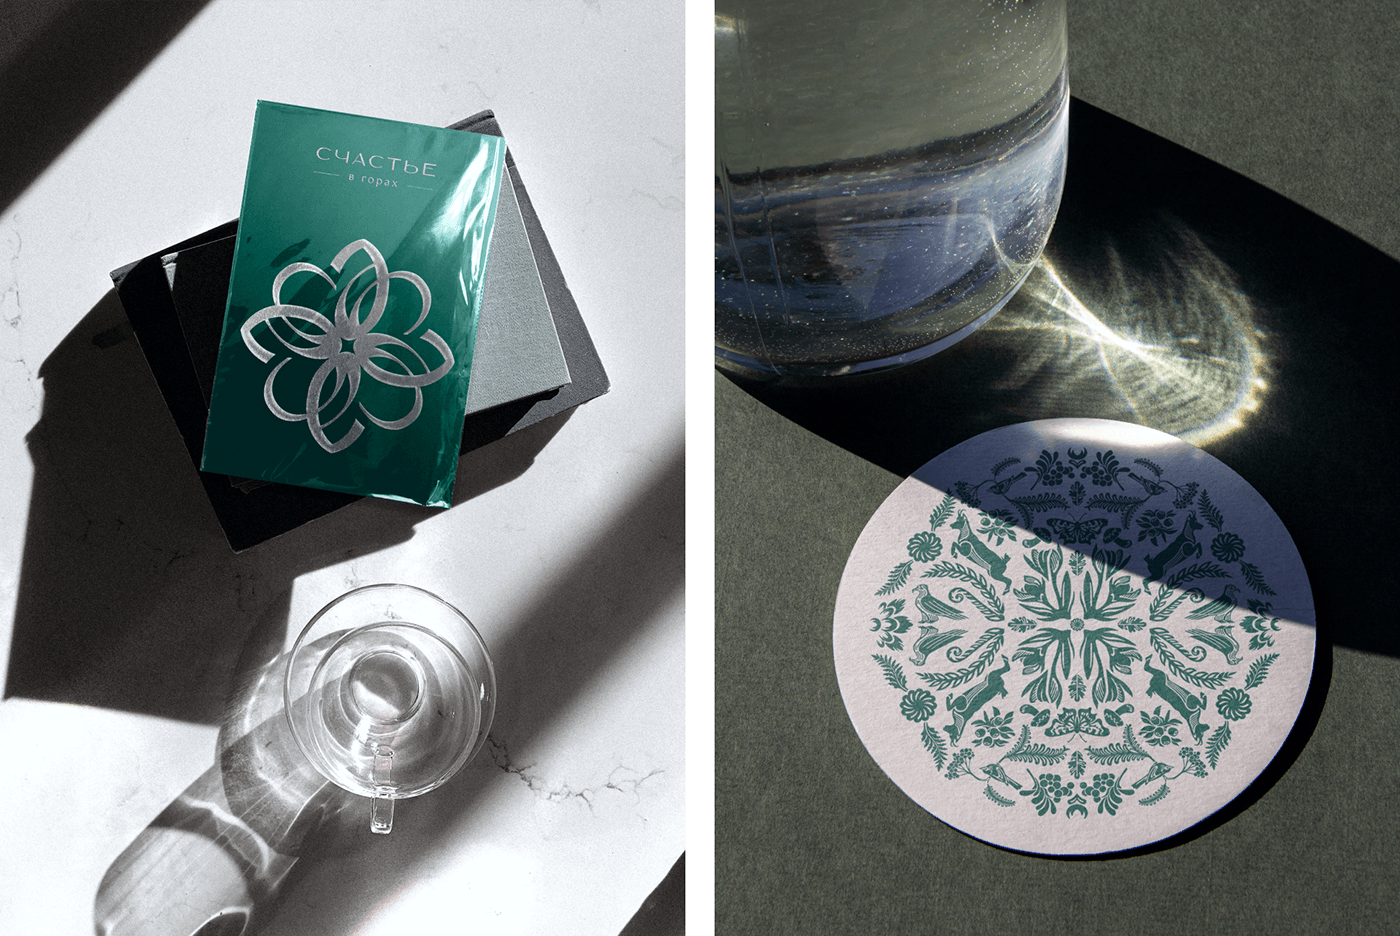 Mockup of the magazine cover with foil embossed logo. The design of the cup holder with an animalist